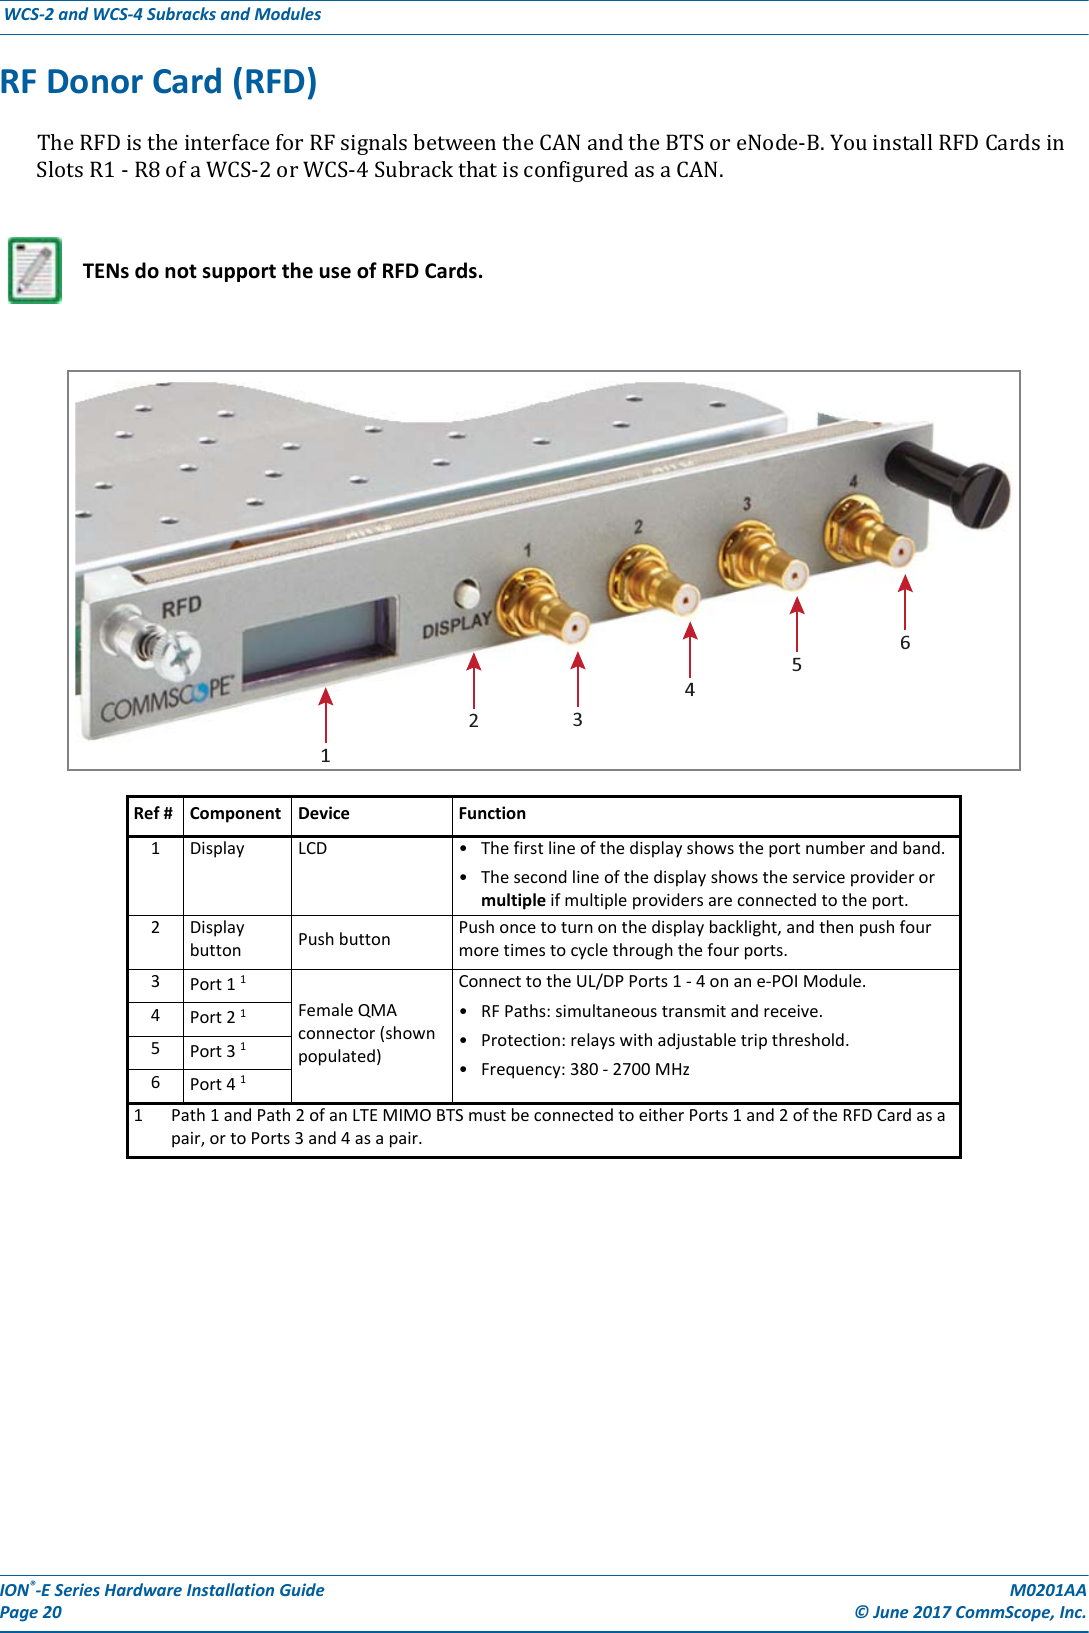 ION®-E Series Hardware Installation Guide M0201AA Page 20 © June 2017 CommScope, Inc. WCS-2 and WCS-4 Subracks and Modules  RF Donor Card (RFD)TheRFDistheinterfaceforRFsignalsbetweentheCANandtheBTSoreNode-B.YouinstallRFDCardsinSlotsR1-R8ofaWCS-2orWCS-4SubrackthatisconfiguredasaCAN.TENs do not support the use of RFD Cards.Ref # Component Device Function1Display LCD • The first line of the display shows the port number and band.• The second line of the display shows the service provider or multiple if multiple providers are connected to the port.2Display button Push button Push once to turn on the display backlight, and then push four more times to cycle through the four ports.3Port 1 1 Female QMA connector (shown populated)Connect to the UL/DP Ports 1 - 4 on an e-POI Module.• RF Paths: simultaneous transmit and receive.• Protection: relays with adjustable trip threshold.• Frequency: 380 - 2700 MHz4Port 2 1 5Port 3 1 6Port 4 1 1 Path 1 and Path 2 of an LTE MIMO BTS must be connected to either Ports 1 and 2 of the RFD Card as a pair, or to Ports 3 and 4 as a pair.213456